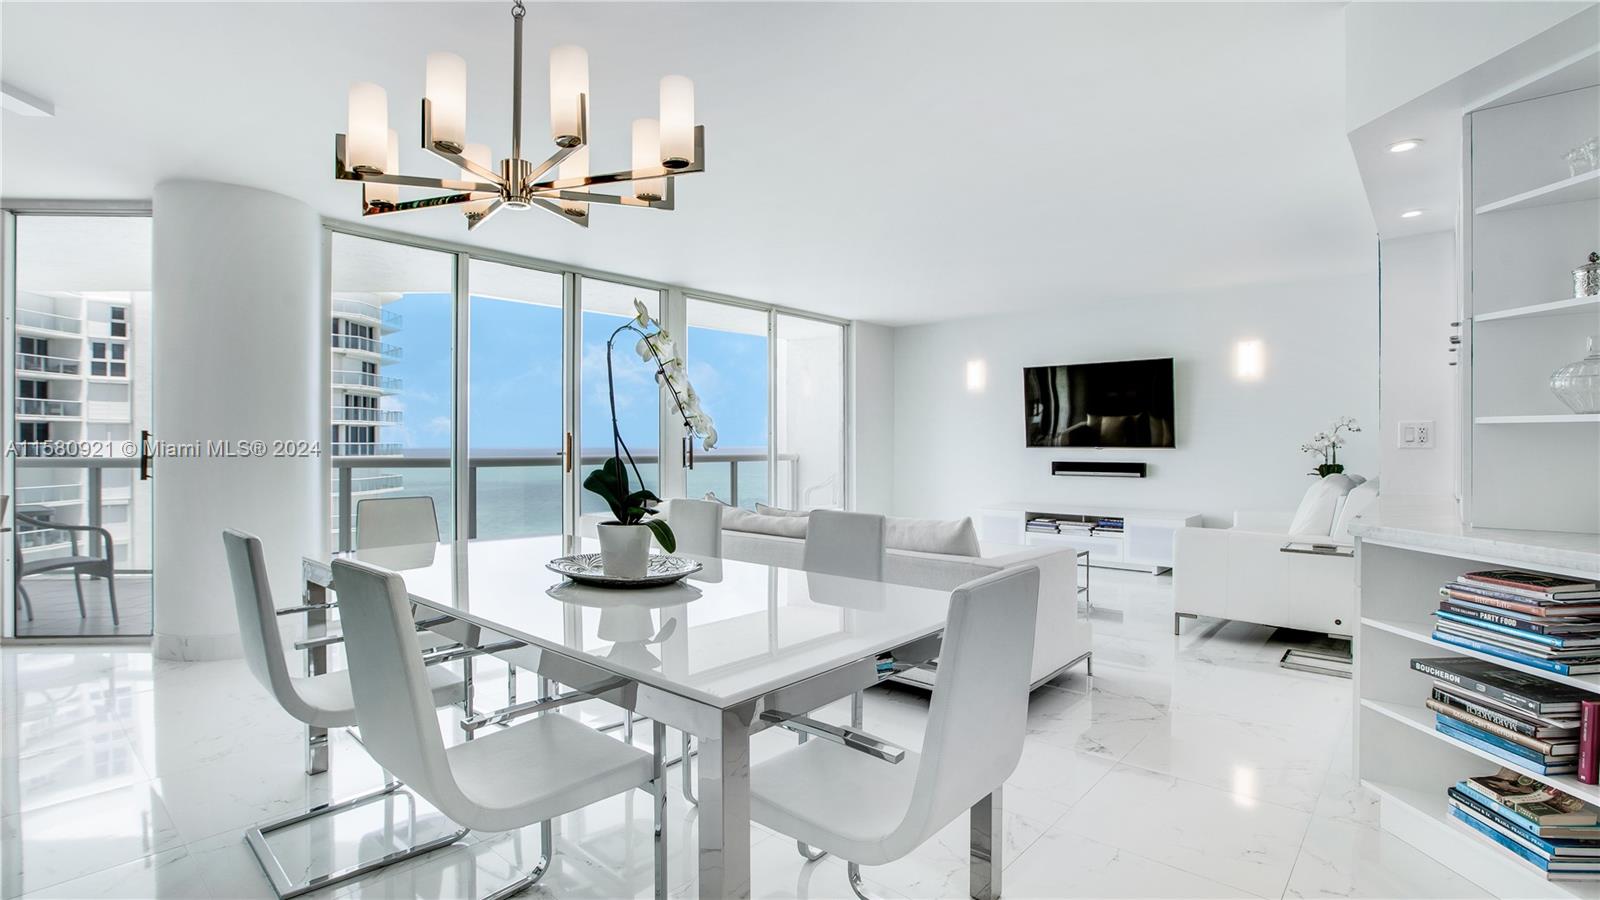 Enjoy luxury living at this gorgeous Ocean-Front Condo! Wake up to stunning ocean views in your spacious primary suite with a large walk-in closet and en-suite spa bath. This 2 bed, 2 bath unit features an open floor plan with beautiful modern finishes, floor to ceiling impact windows, tons of natural light, spacious bedrooms and stunning views of the Intracoastal & Ocean. Enjoy resort amenities including secured gatehouse entry, onsite concierge, health club with gym and spa, beauty salon, 2 restaurants, daily exercise classes, tennis center, and private beach club. Walking distance to shops and restaurants.